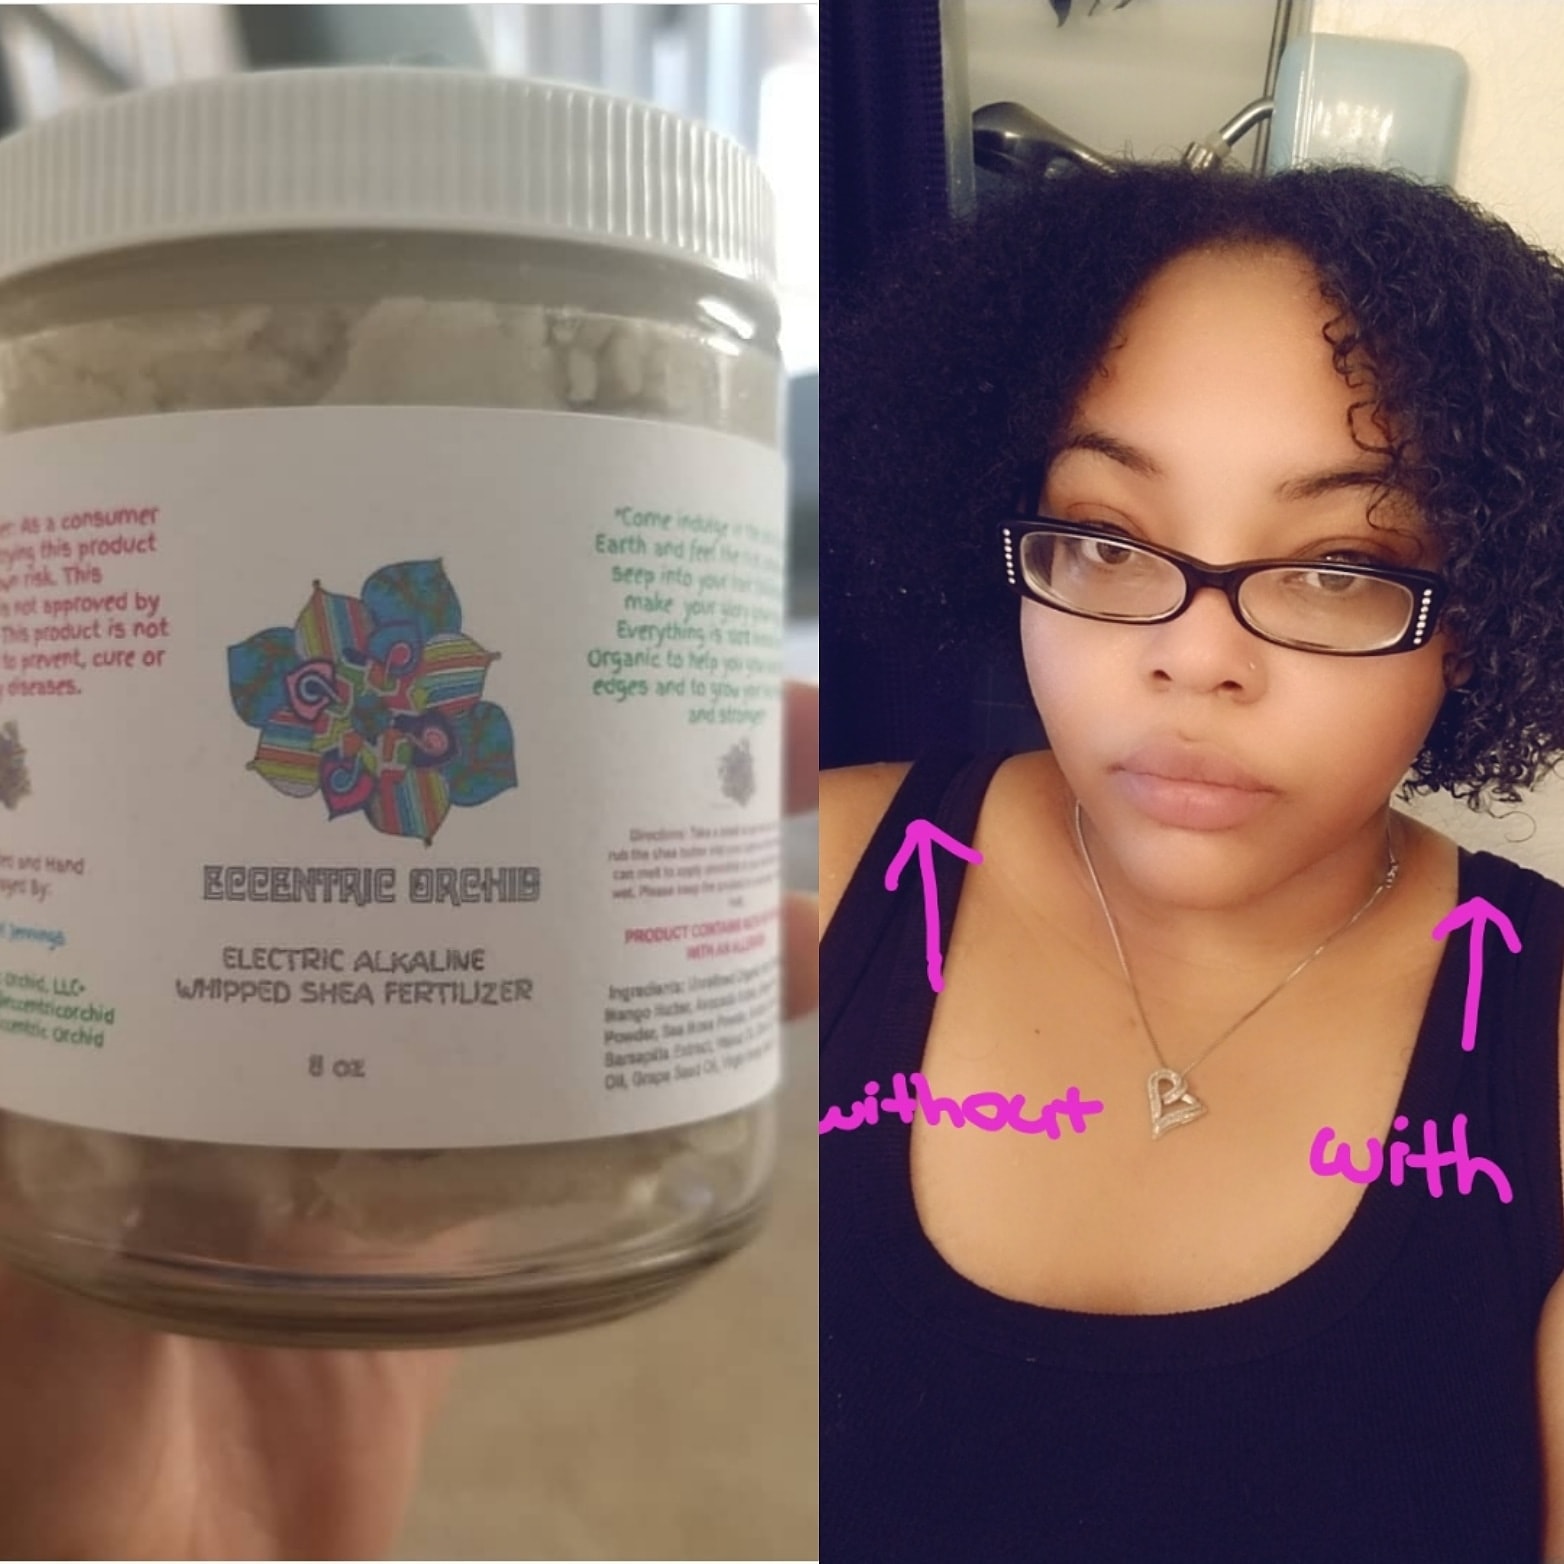 Whipped Electric Alkaline Hair Butter by Eccentric Orchid – Moor Herbs